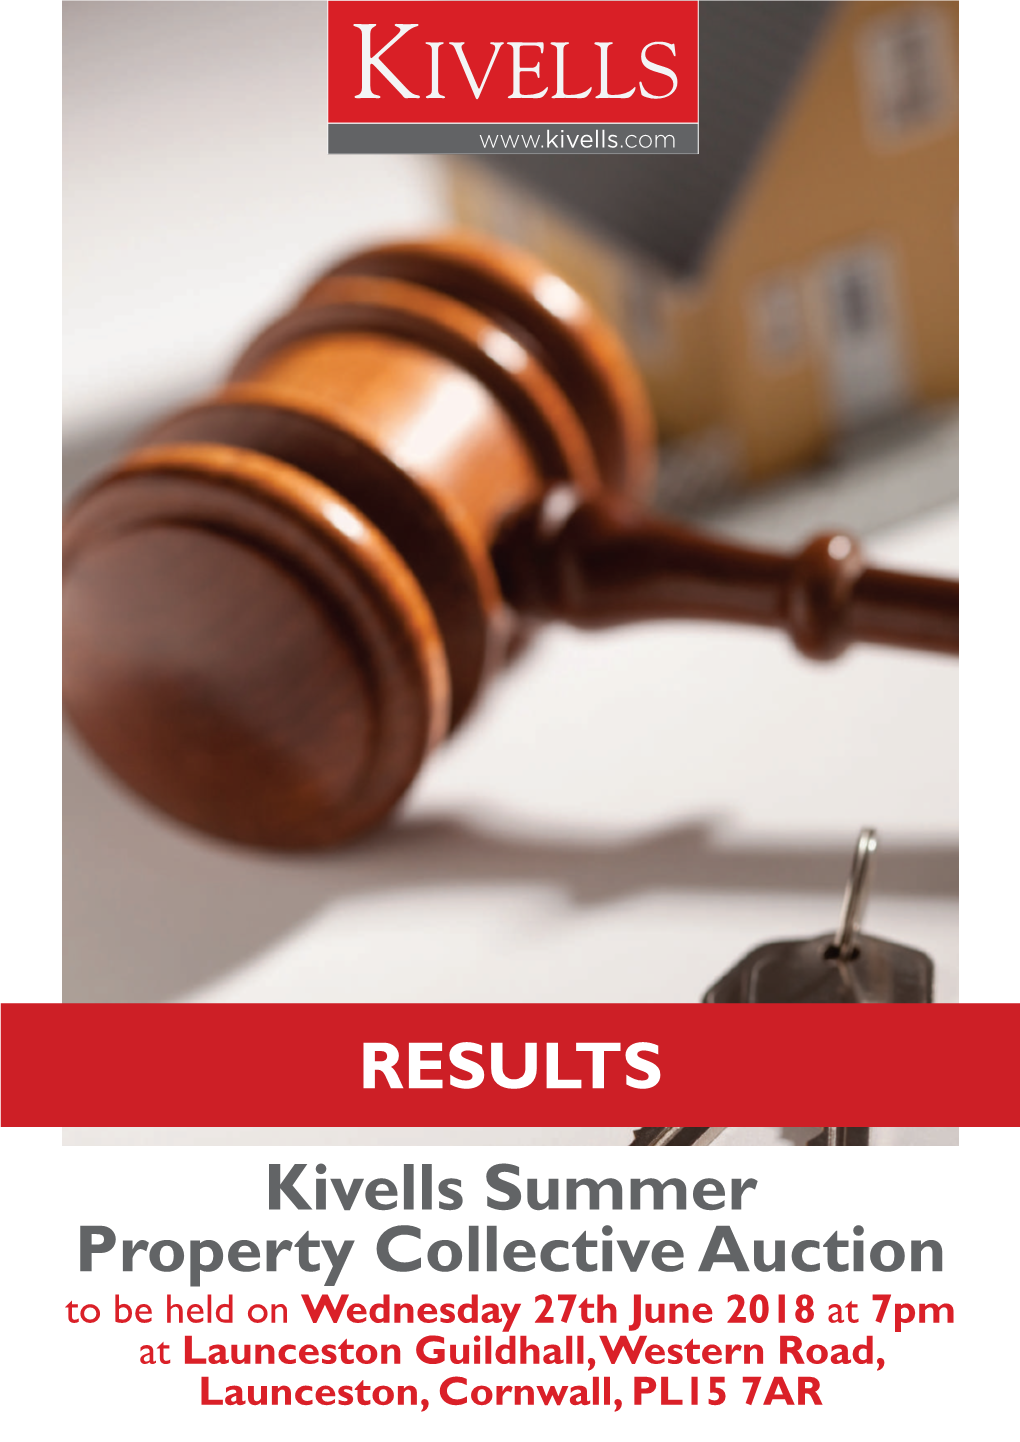 Kivells Summer Property Collective Auction RESULTS